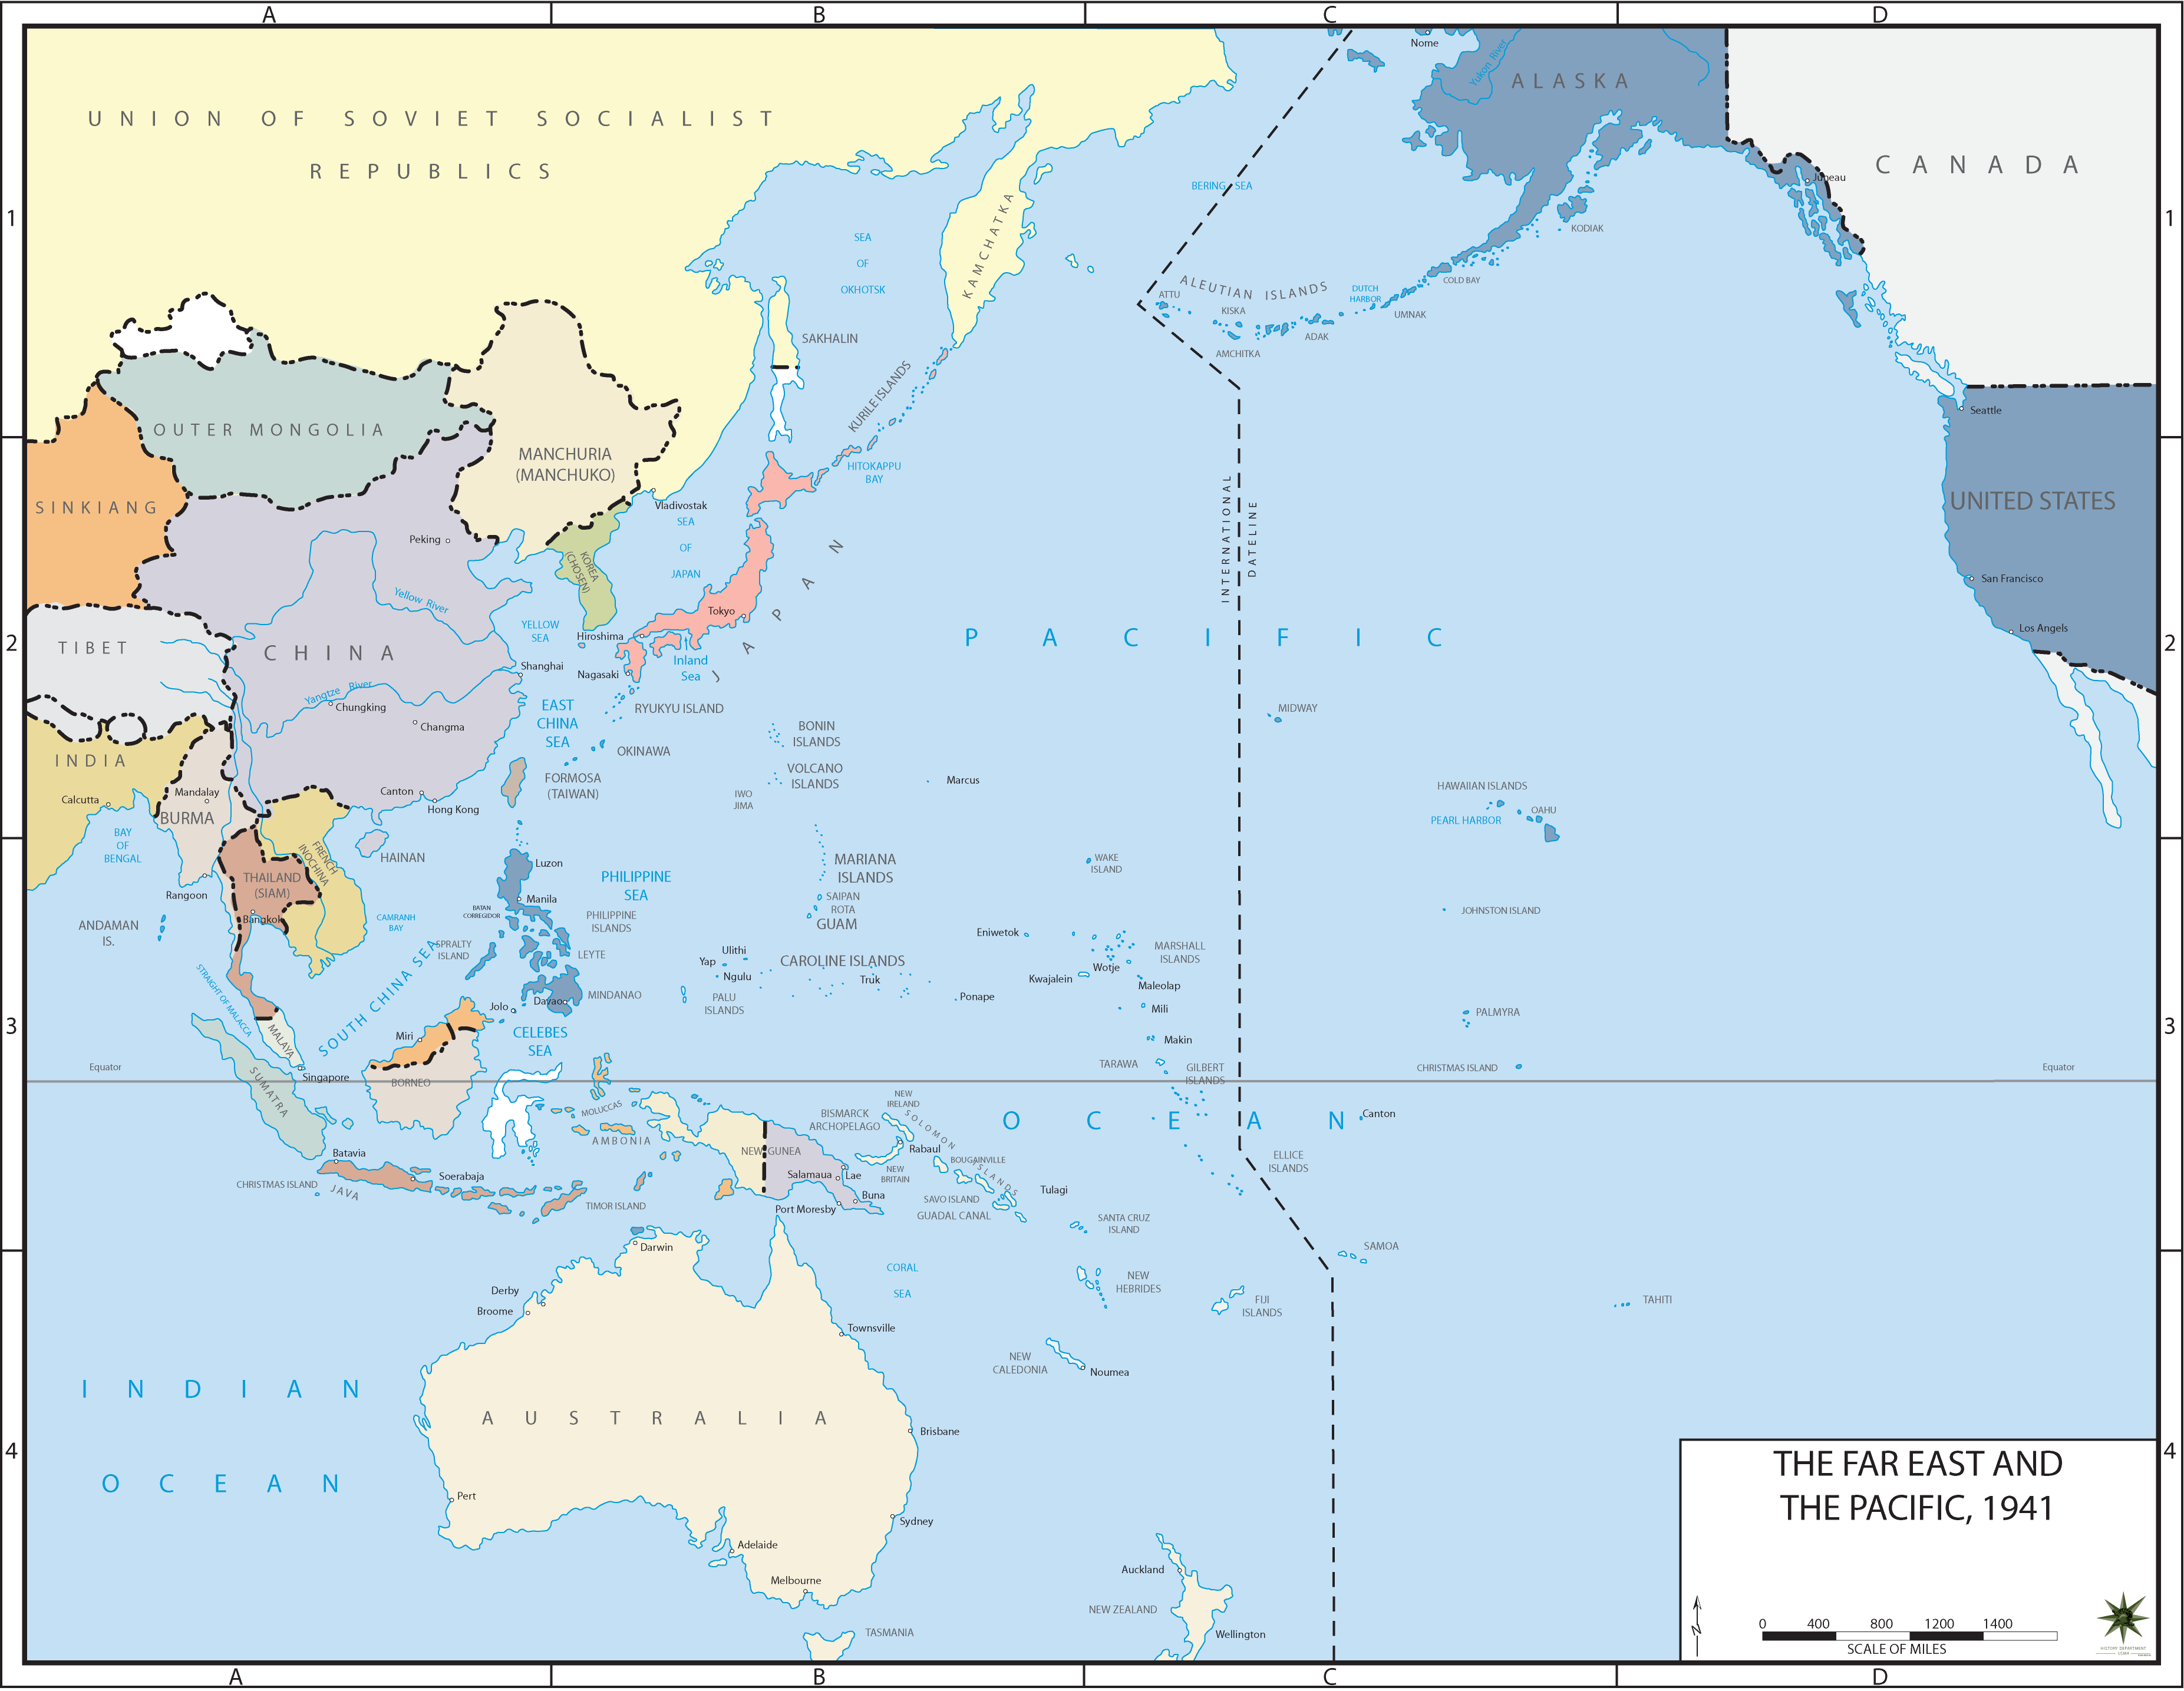 The Far East and the Pacific map, 1941.